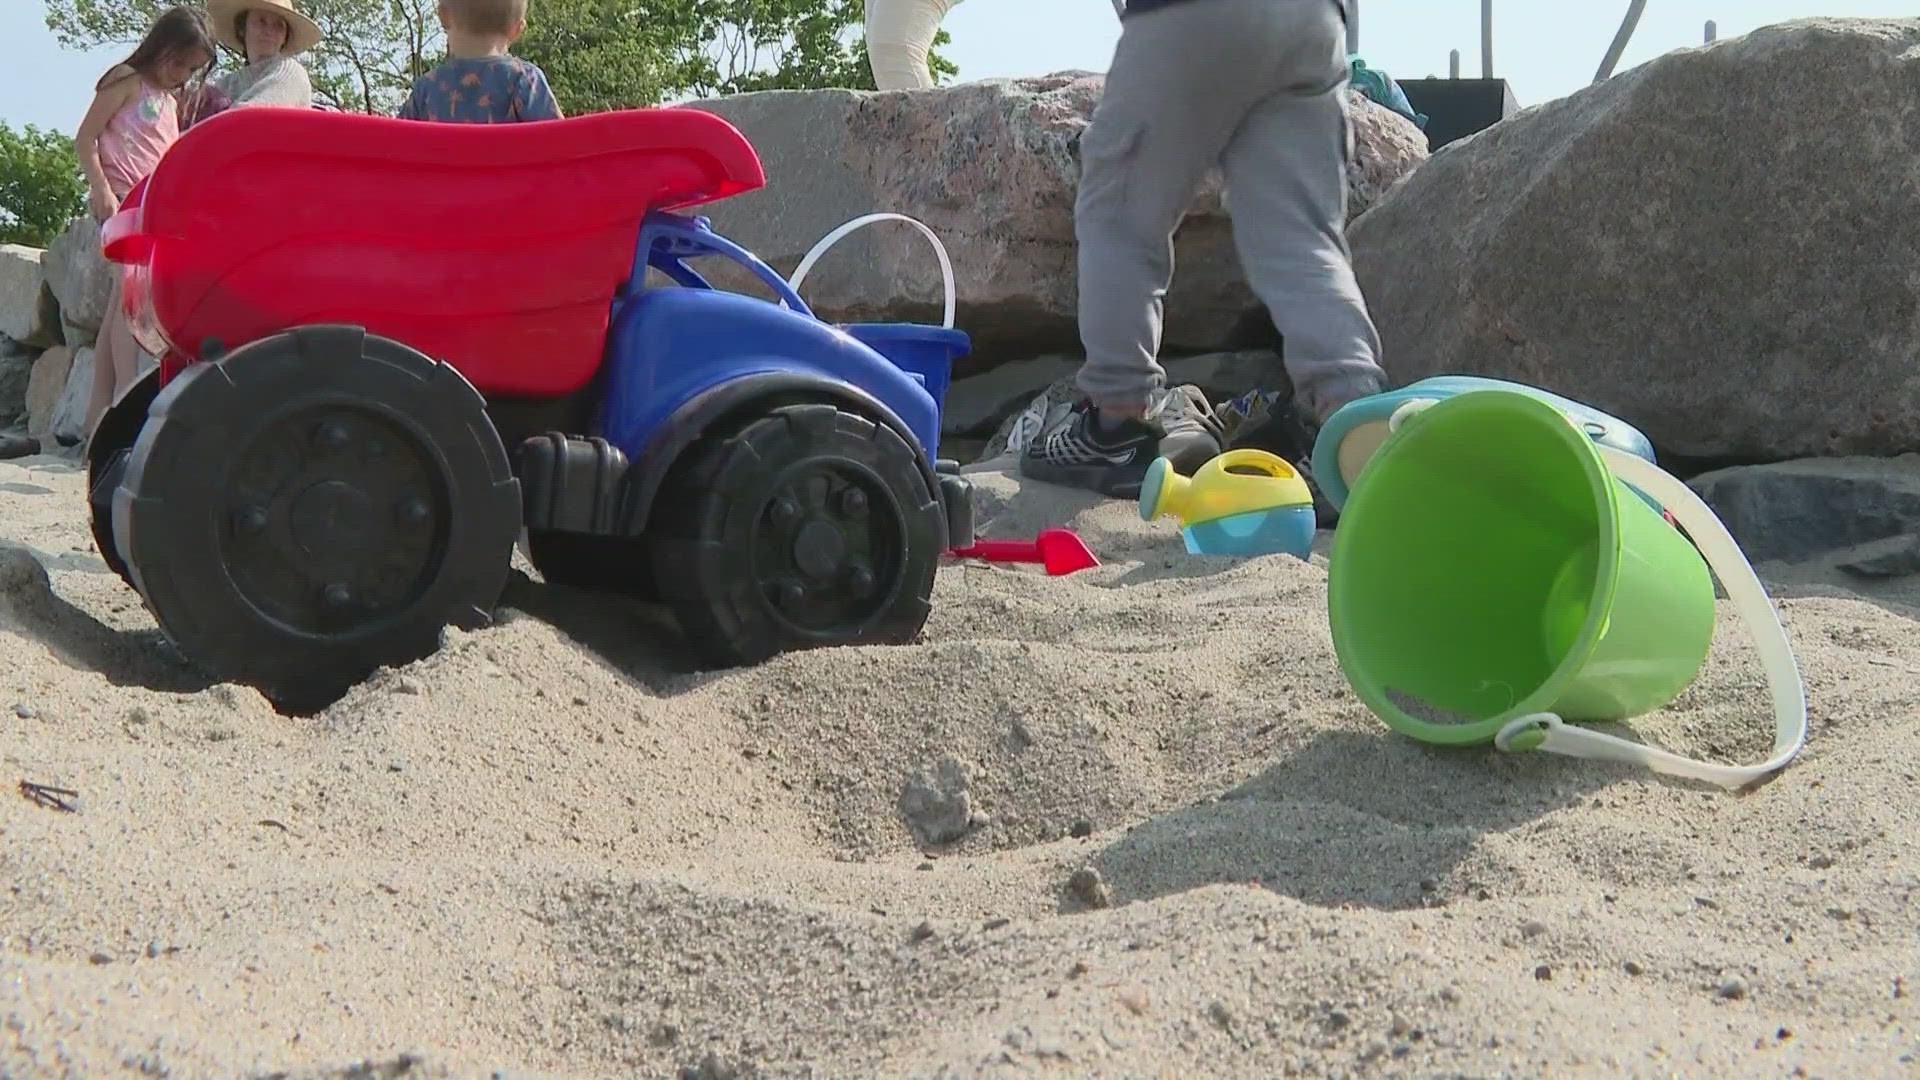 This project is leaving a mark in the sand for kids who spend a day at the beach.